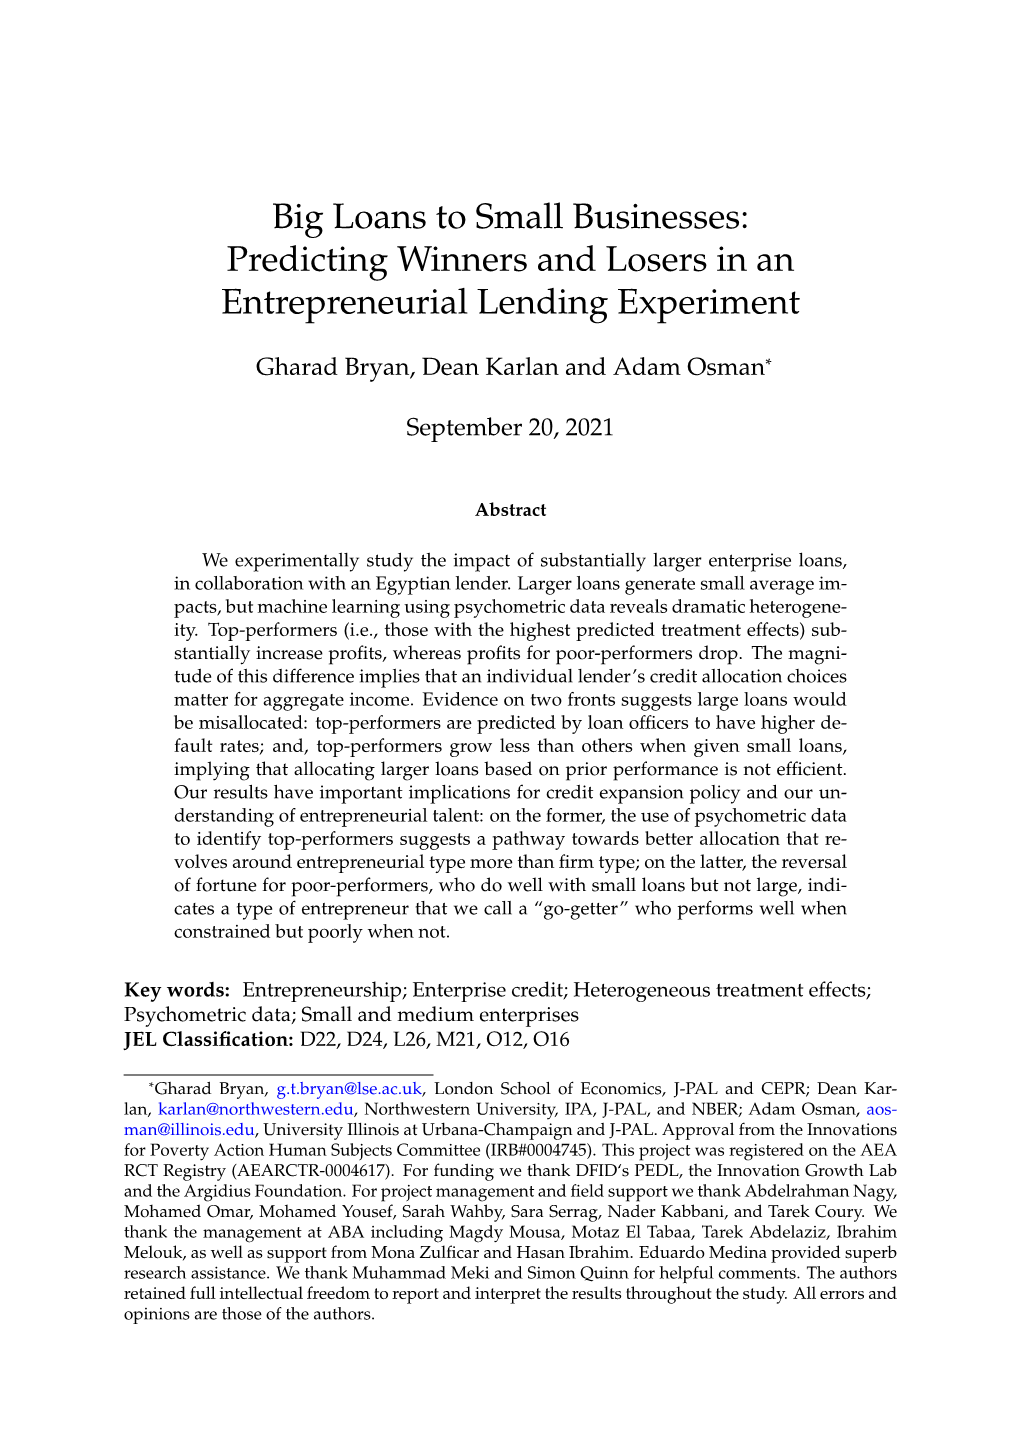 Big Loans to Small Businesses: Predicting Winners and Losers in an Entrepreneurial Lending Experiment